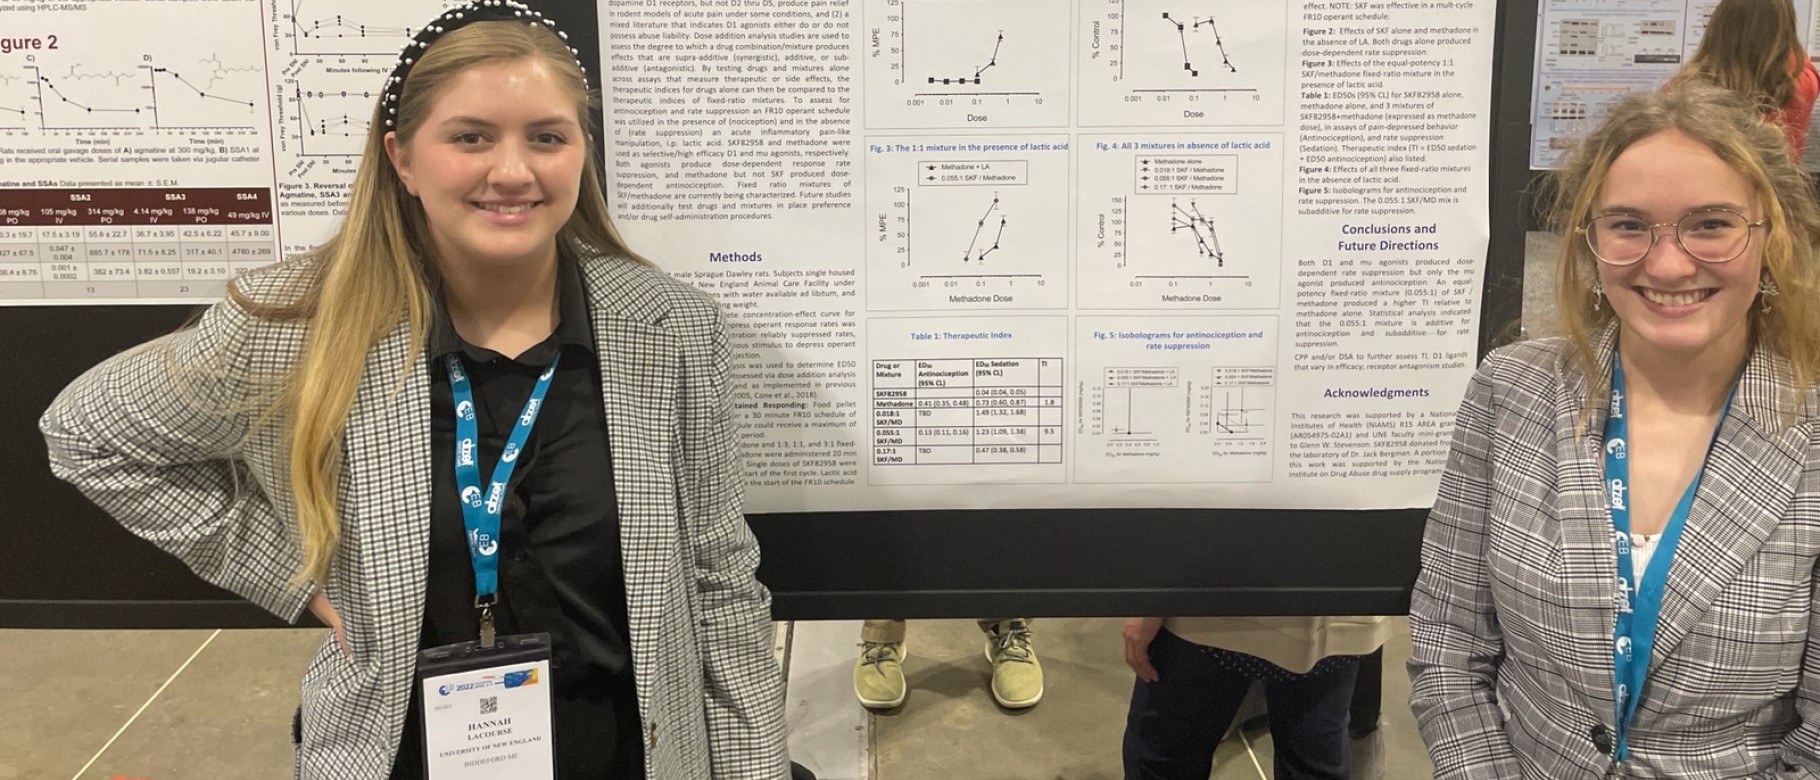 Hannah LaCourse, ‘23 (left) and Francesca Asmus, ‘22 (right) at the 2022 Experimental Biology meeting in Philadelphia in front of their poster